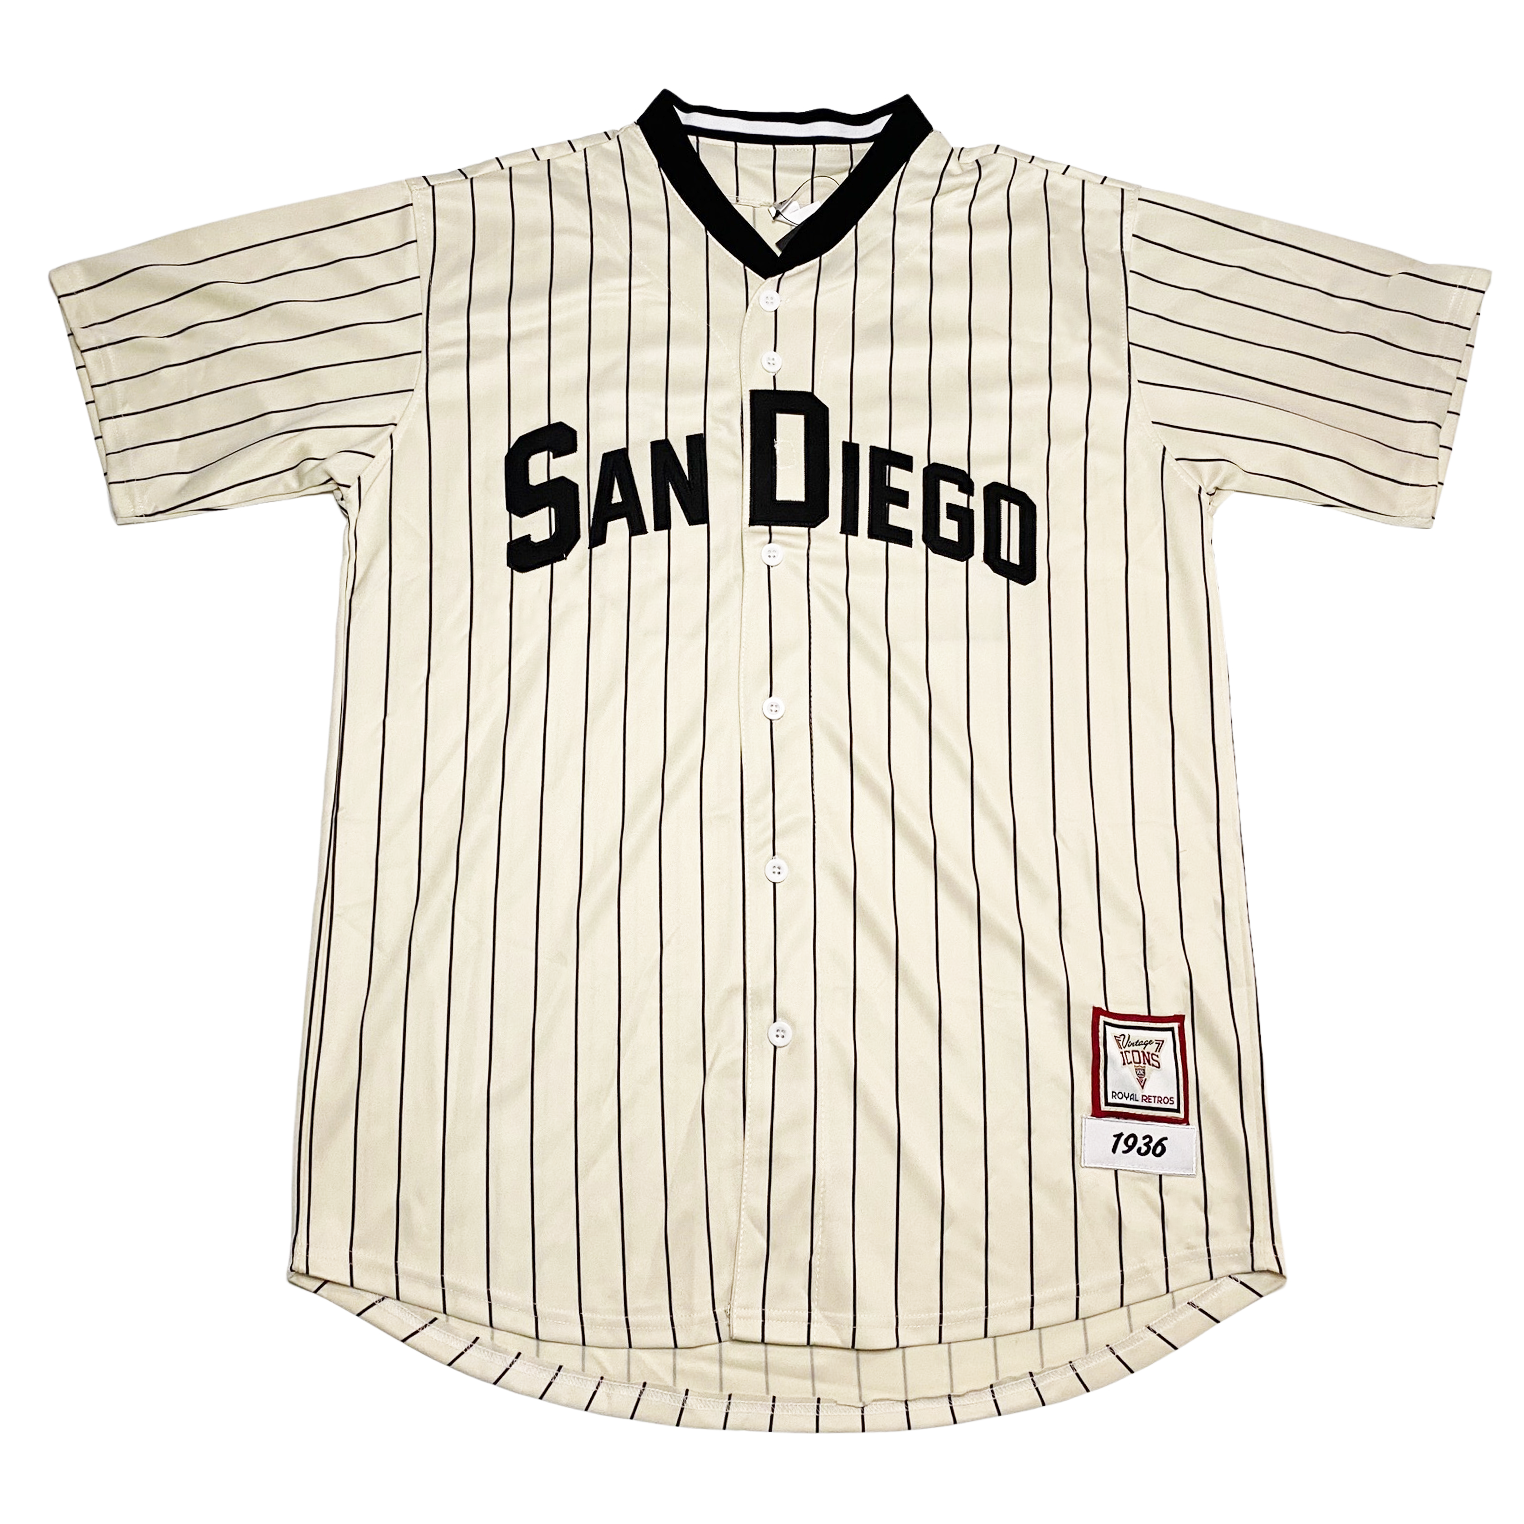 I Miss the Padres Throwbacks Uniforms